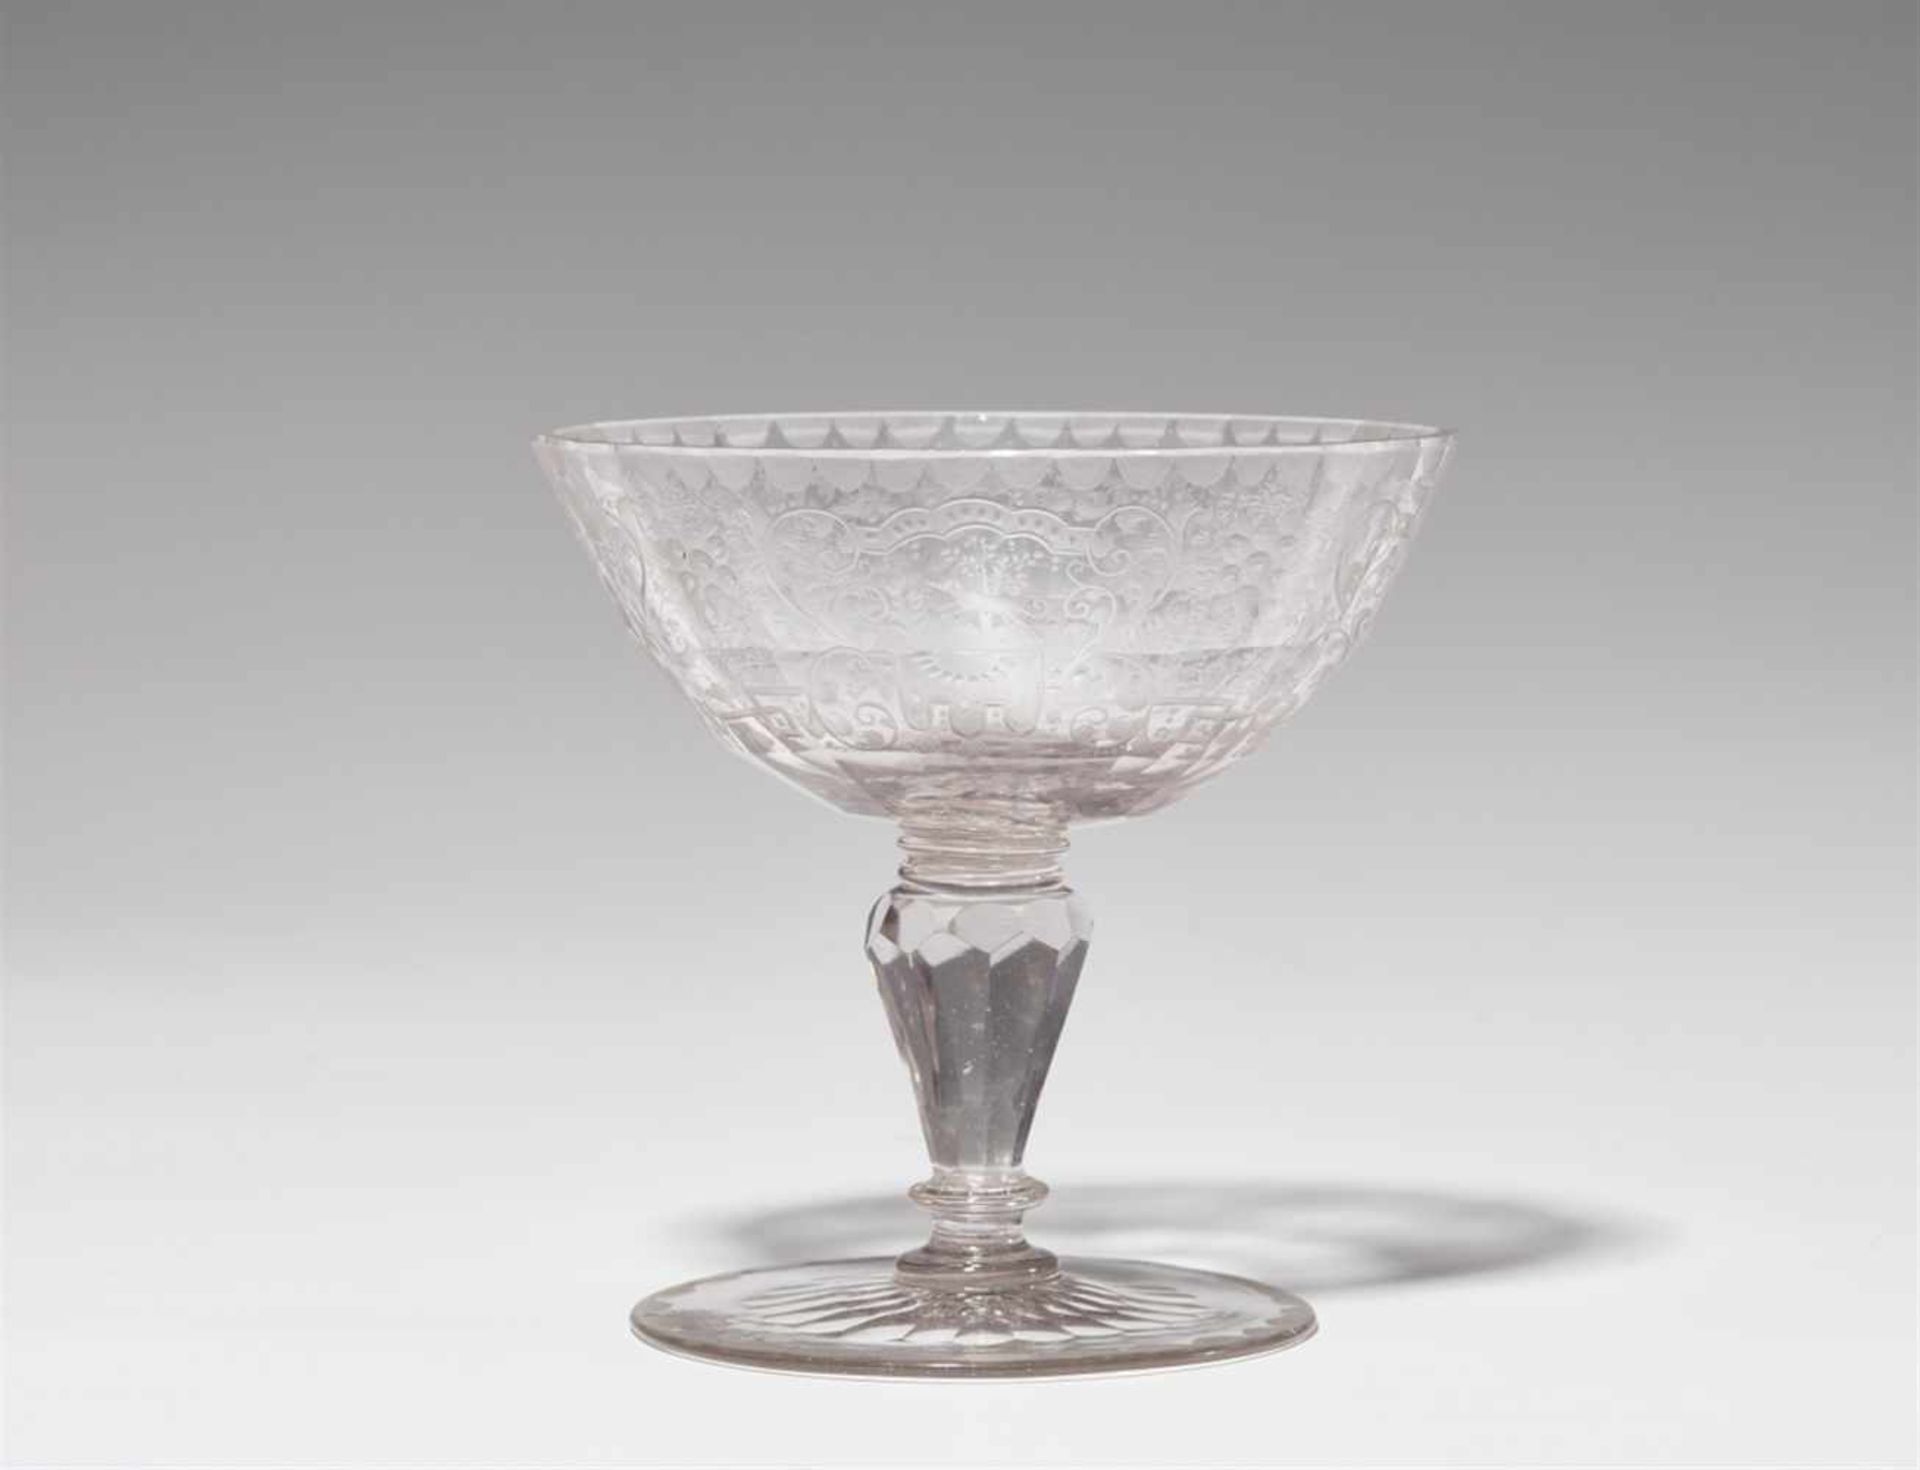 A Silesian glass goblet with engraved decorFacetted oval dish with tendril and strapwork decor